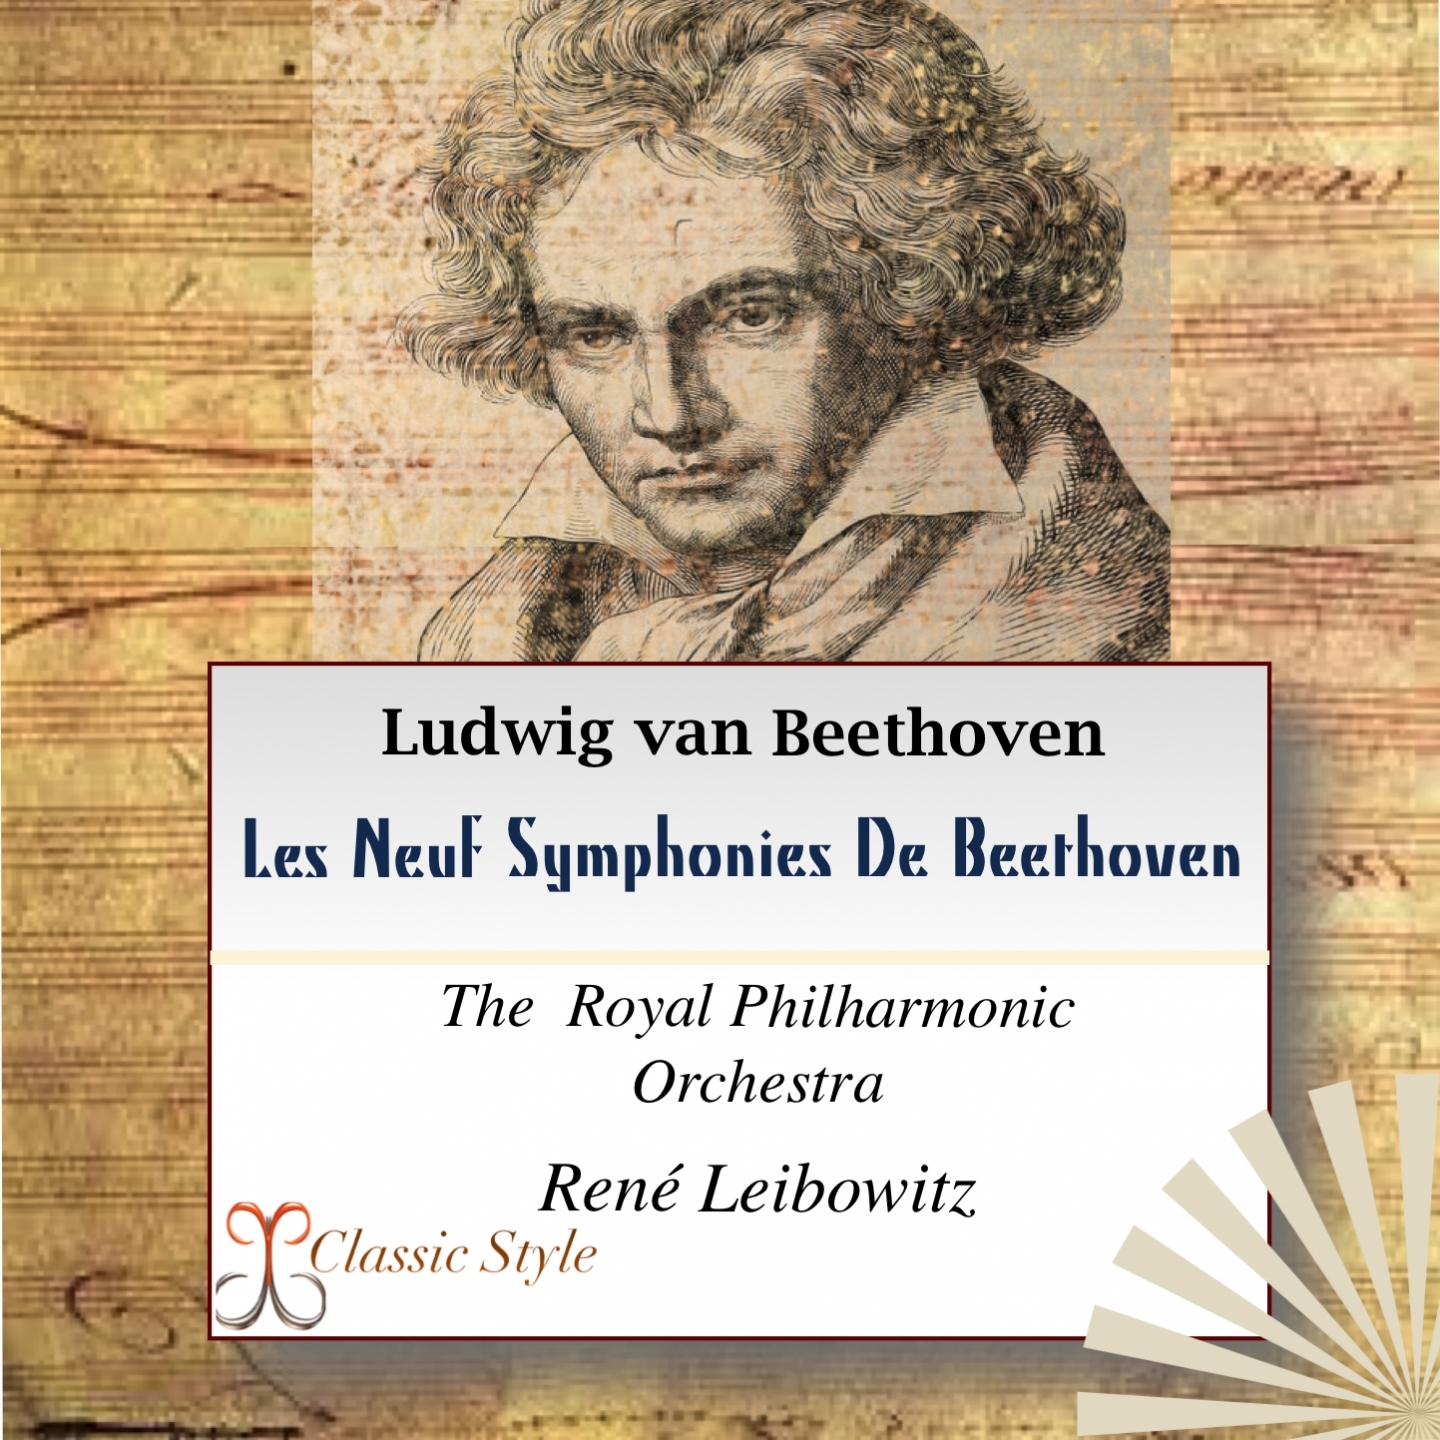 The 9 Symphonies of Beethoven